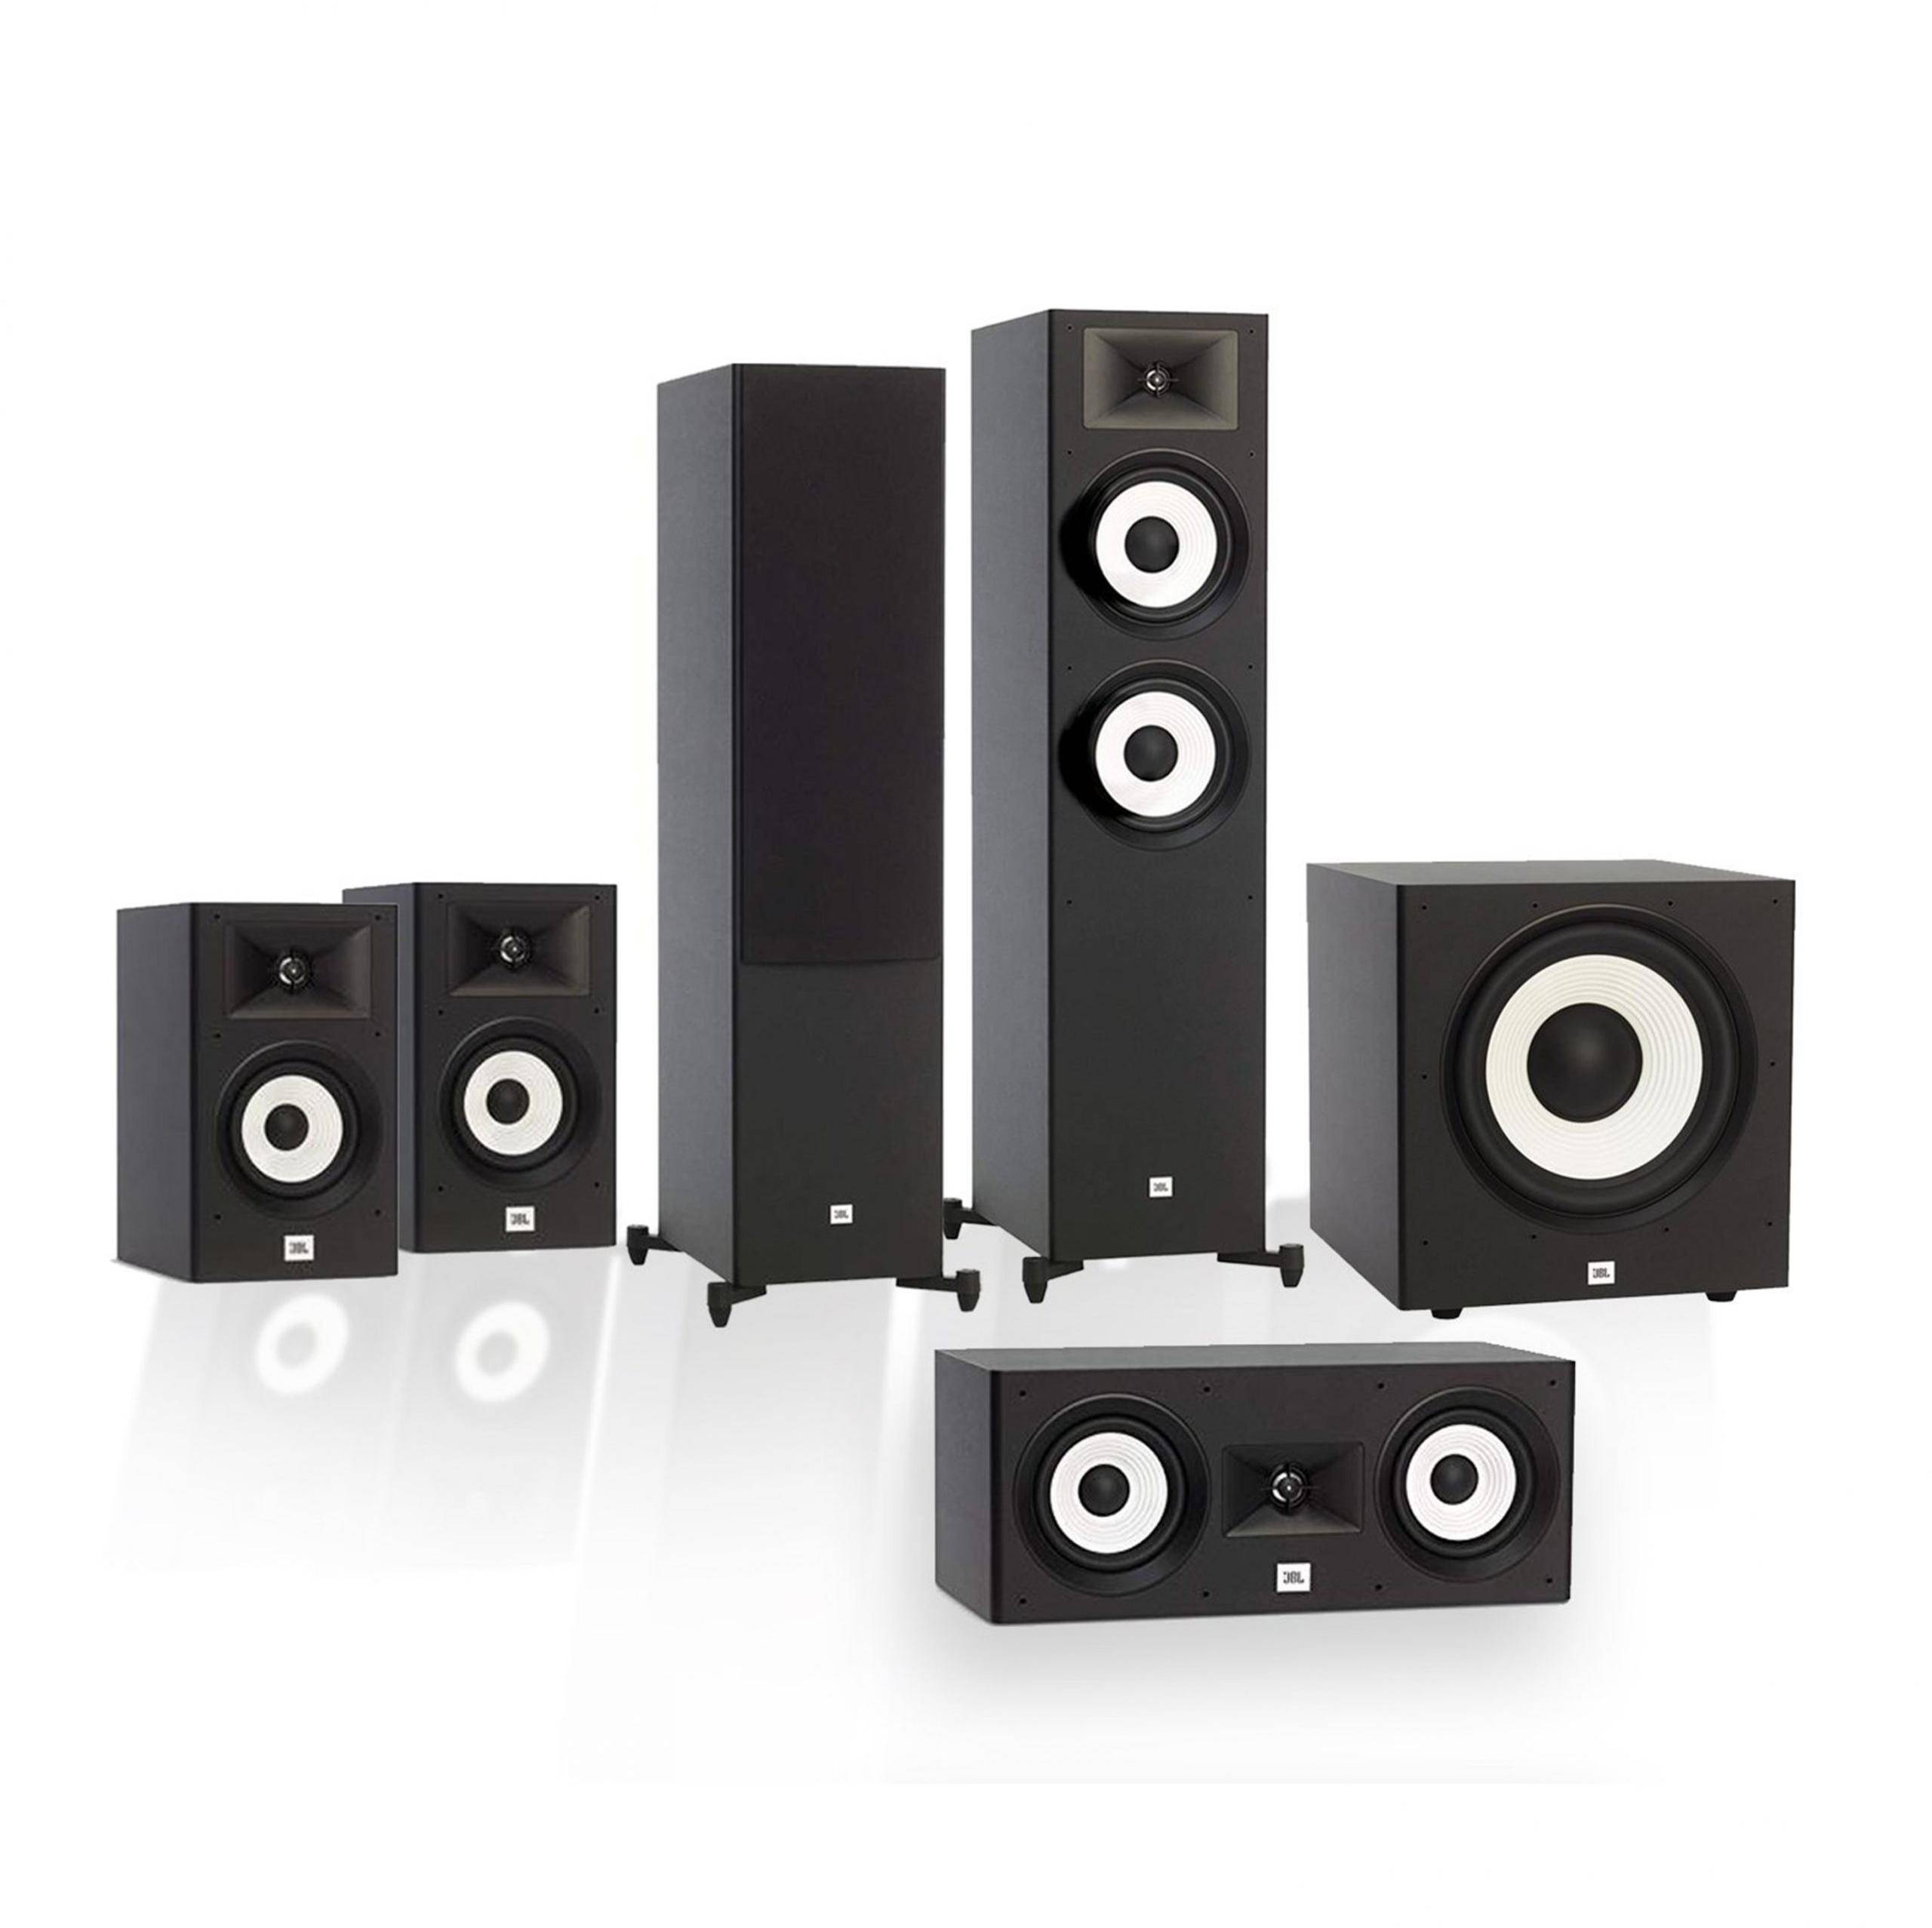 JBL Stage A170 Series 5.1 Home Theater Speakers zoom image